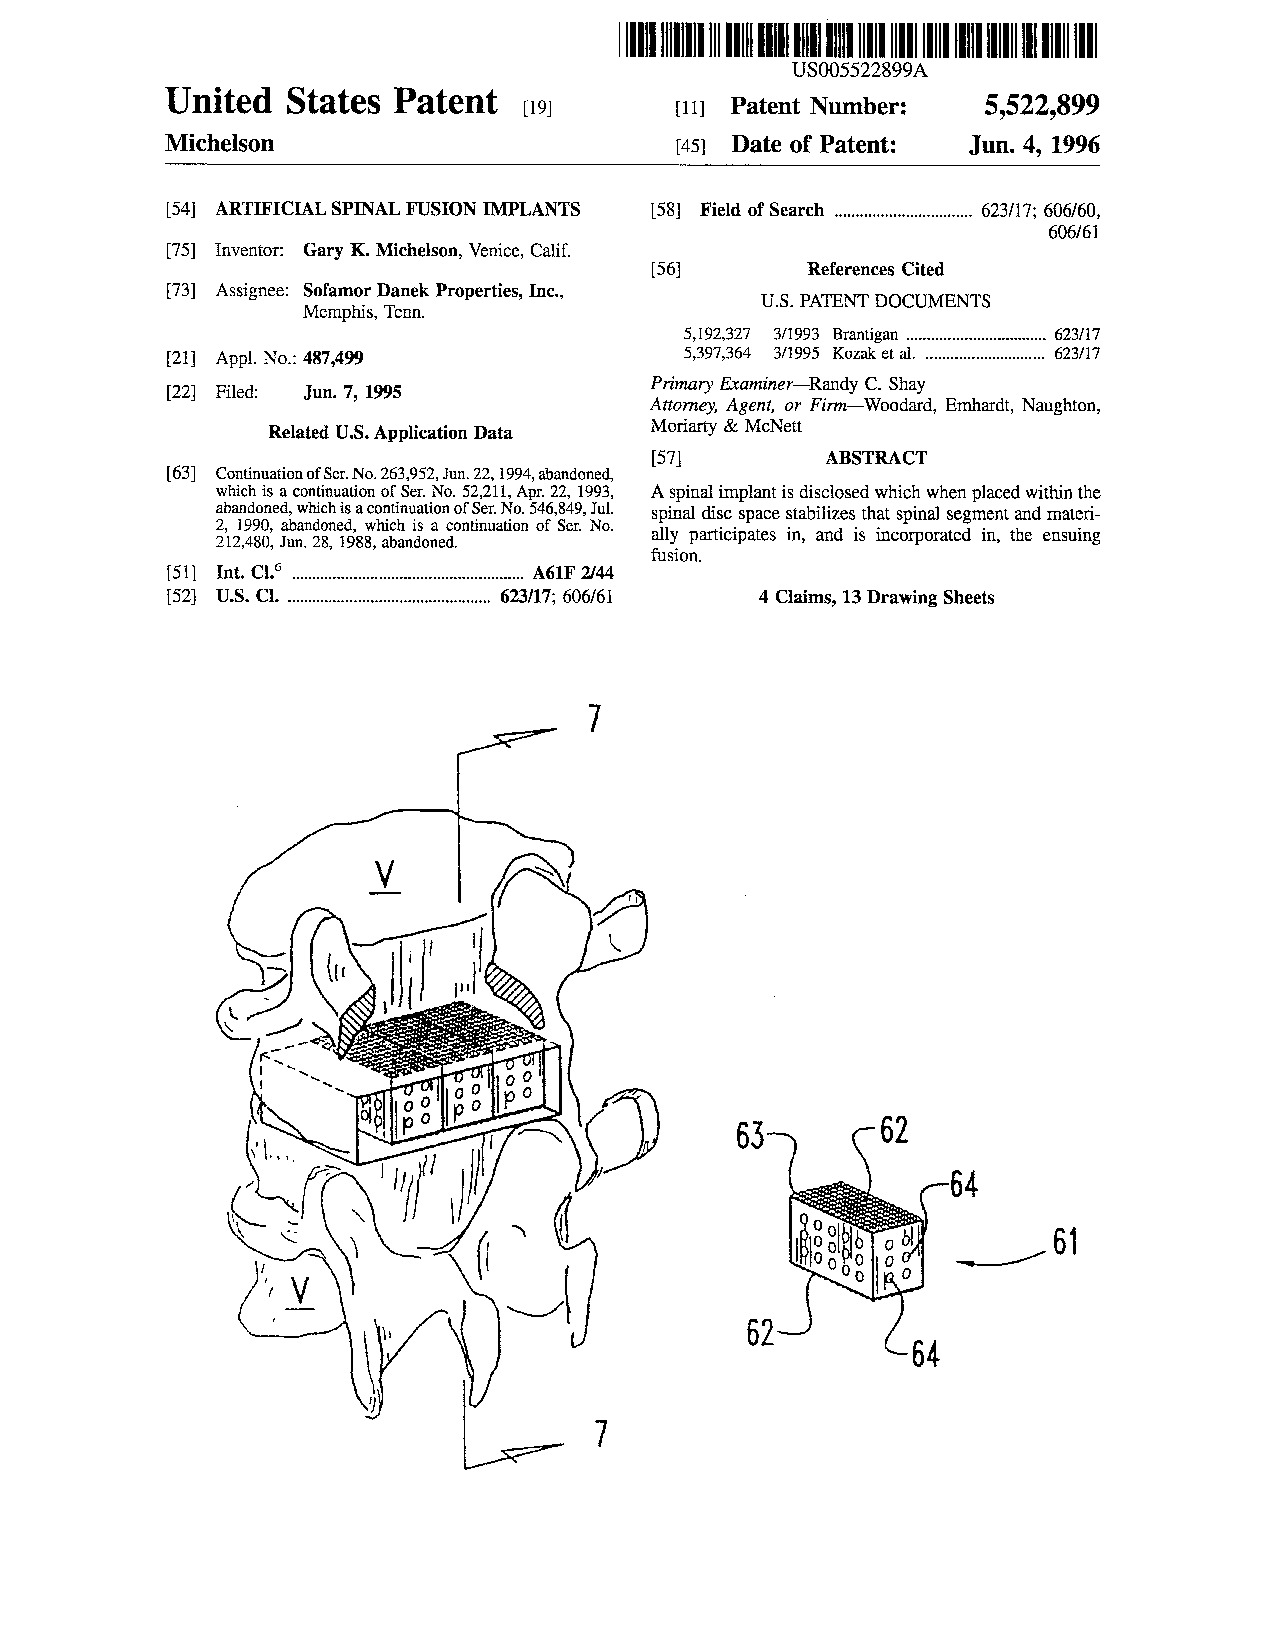 Artificial spinal fusion implants - Patent 5,522,899